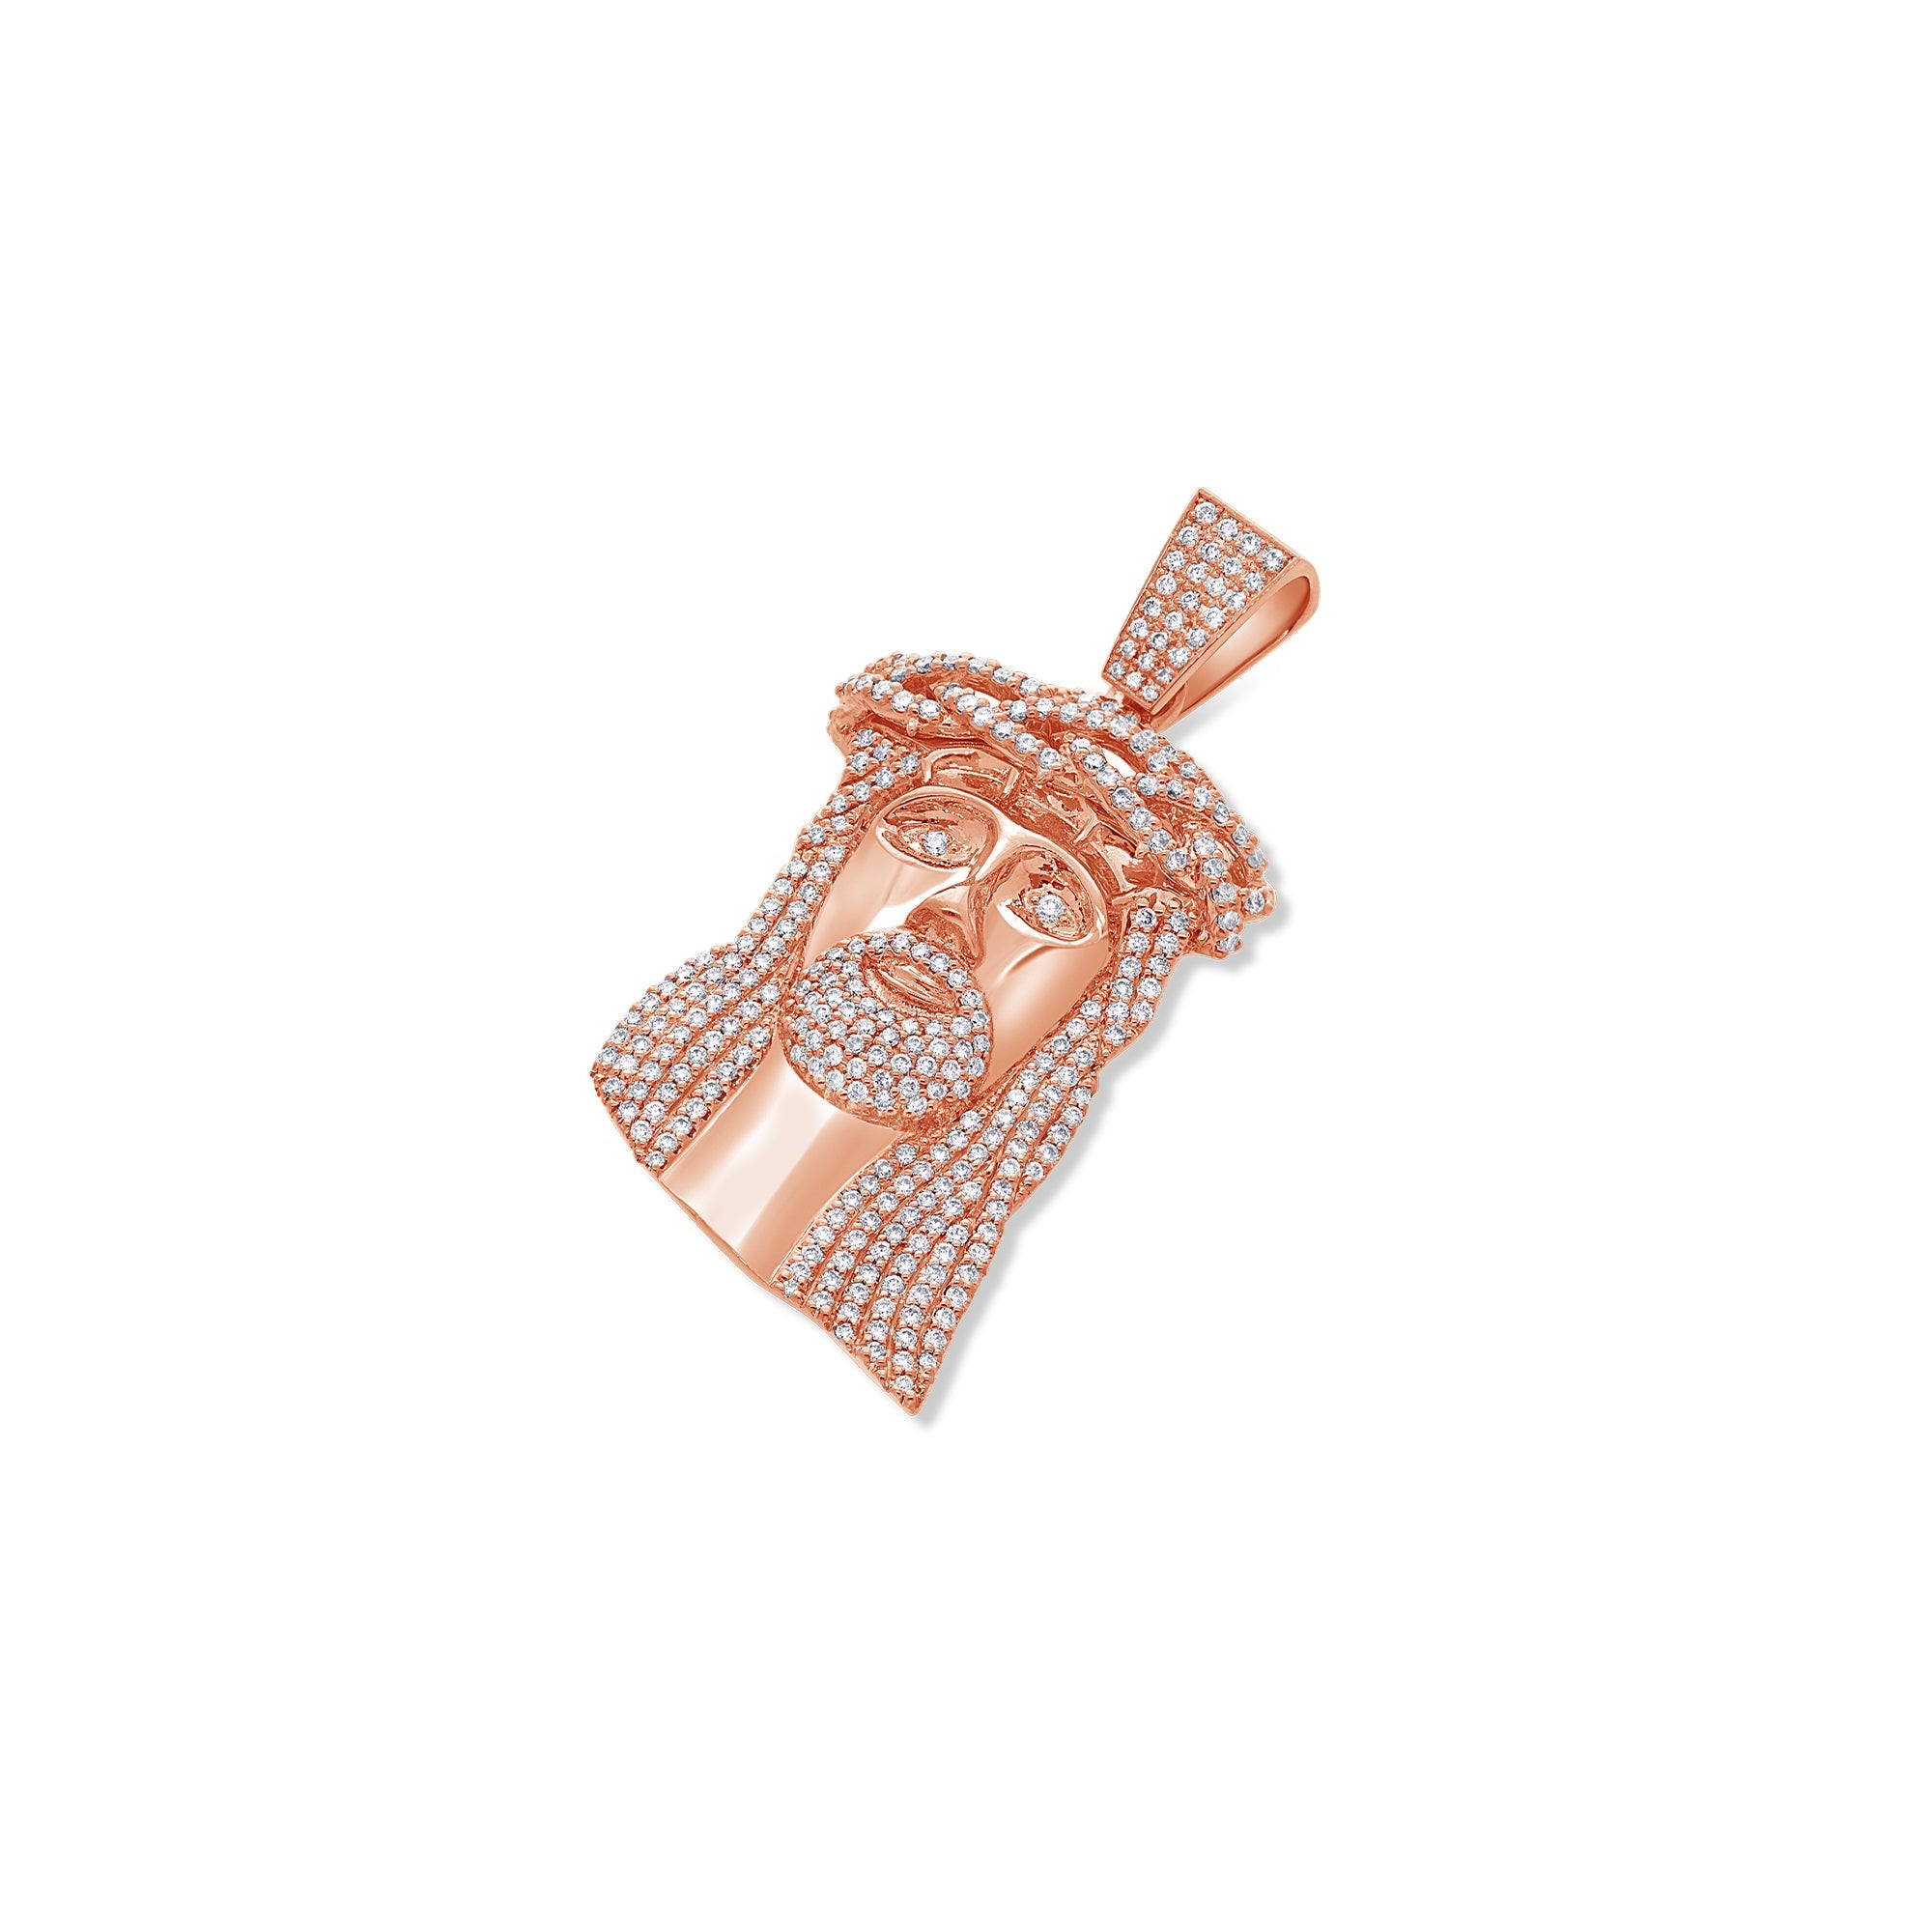 Baby Jesus Piece (Fully Iced) (14K ROSE GOLD) - IF & Co. Custom Jewelers